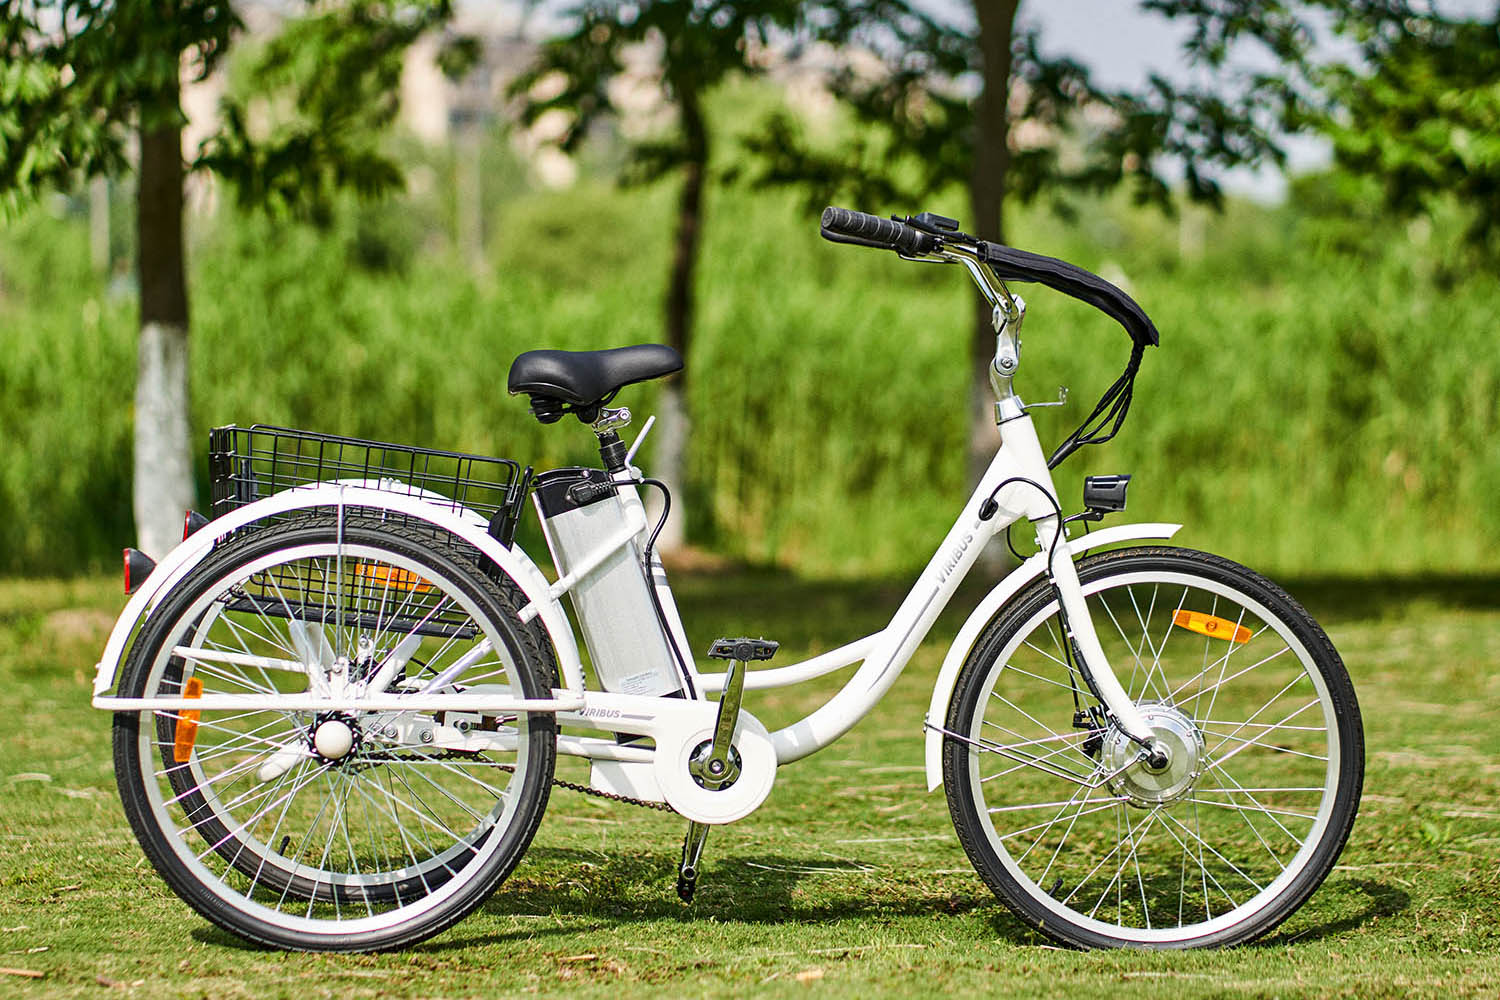 The 5 most confusing questions for beginners - how to wisely choose an electric tricycle